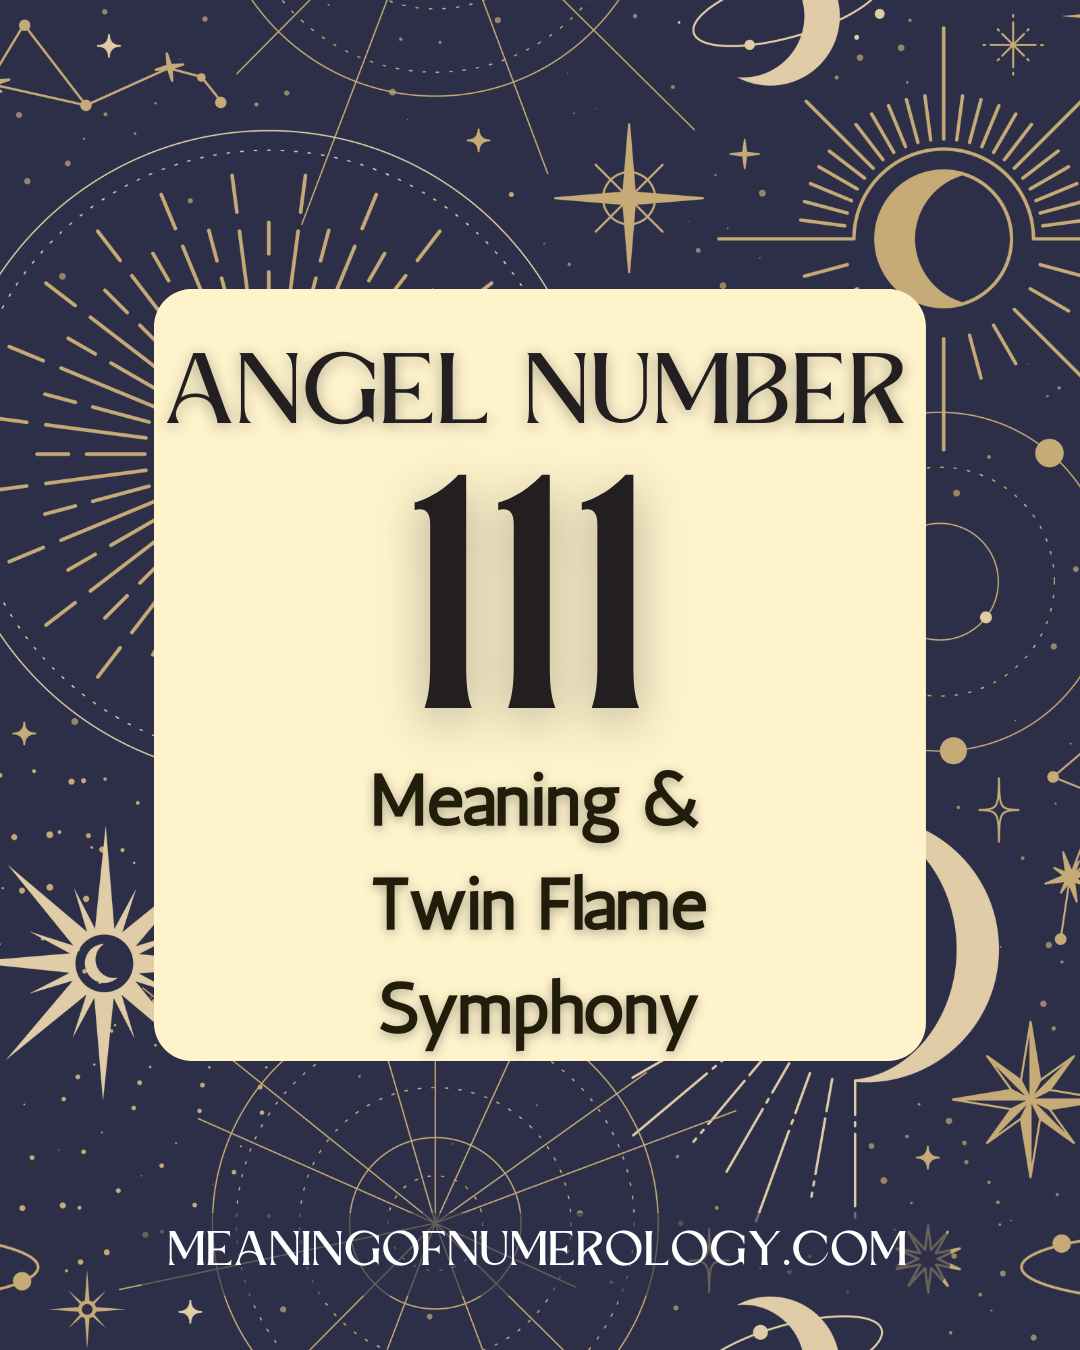 Purple Mystic Astrology Moon Angel Number 111 Meaning & Twin Flame Symphony